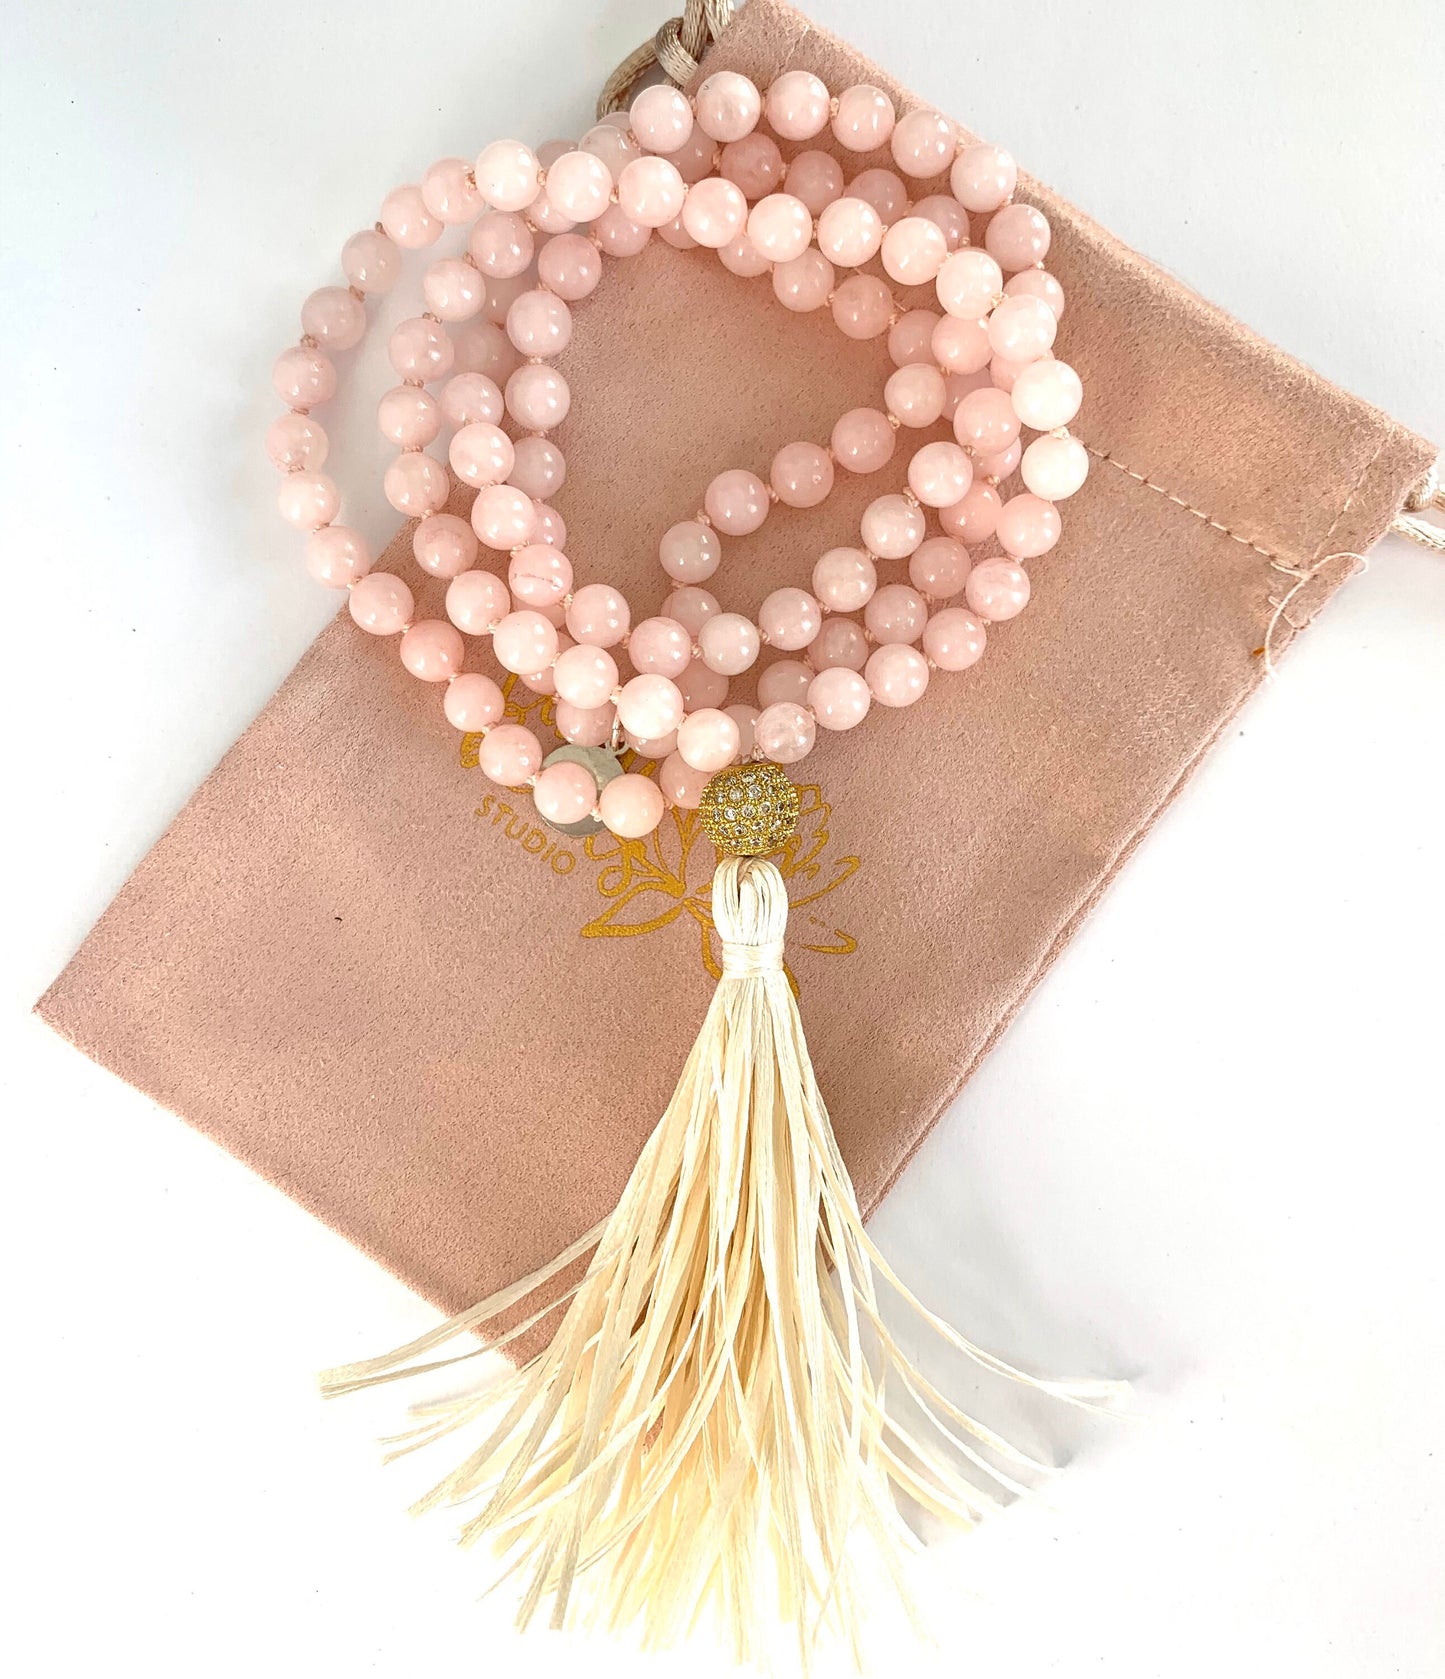 Mala Beads for Love and Friendship, Rose Quartz with a Pave' CZ Guru Bead